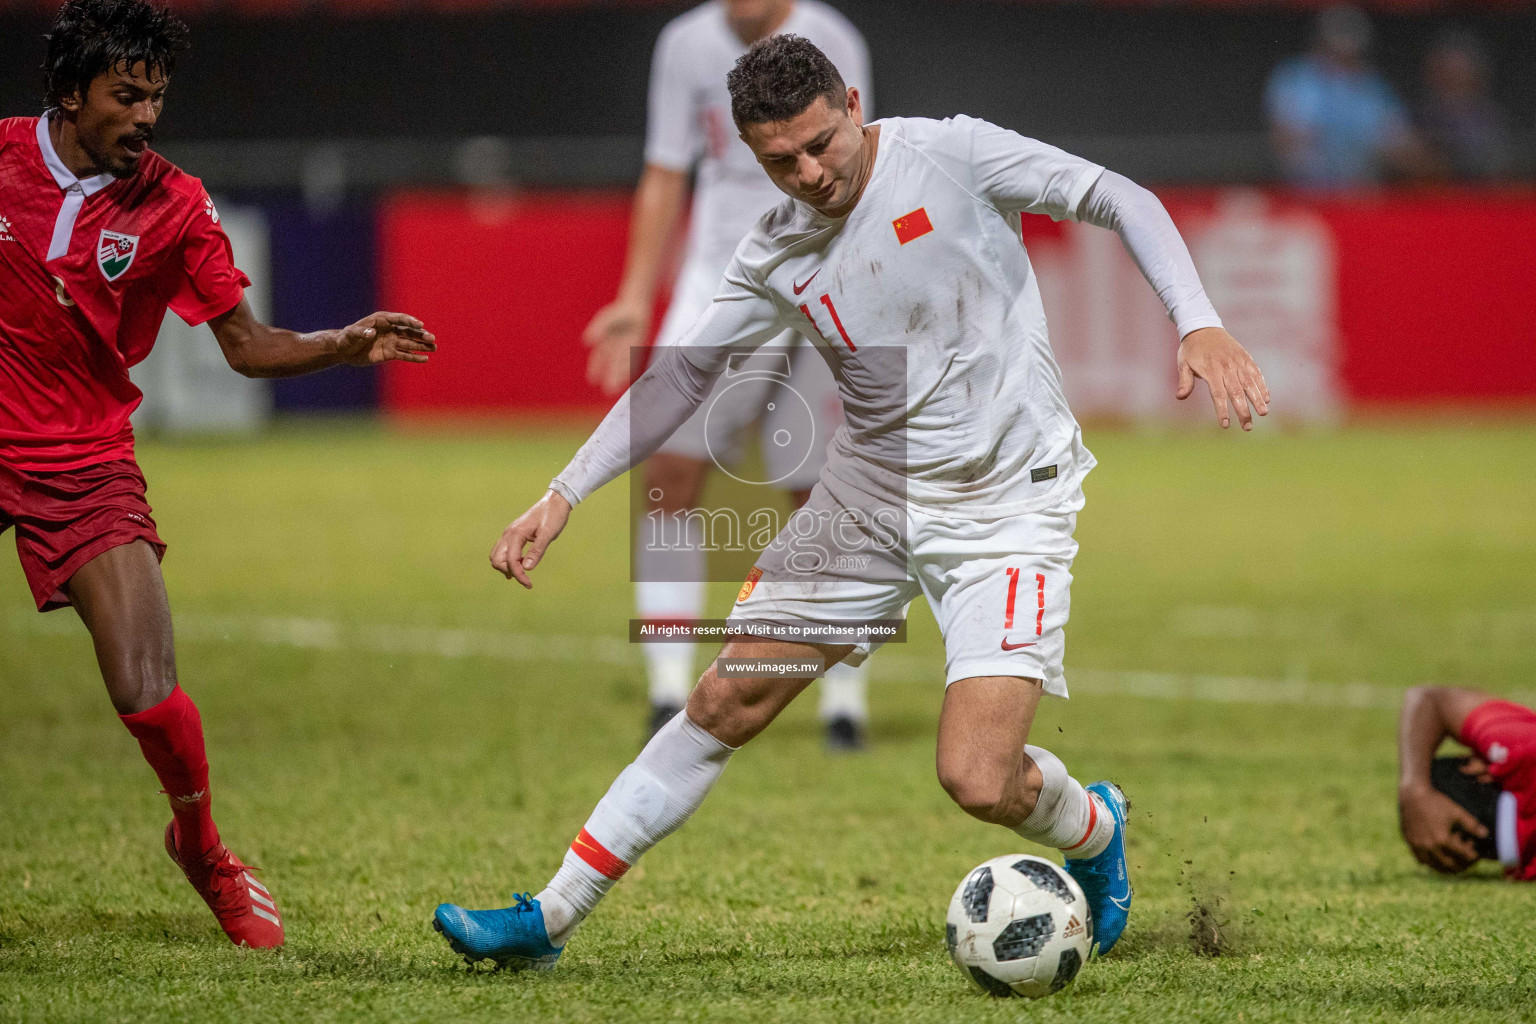 Maldives vs China in FIFA World Cup Qatar 2022 & AFC Asian Cup China 2023 Qualifier on 10th September 2019 in Male, Maldives Photos: Suadhu Abdul Sattar /images.mv